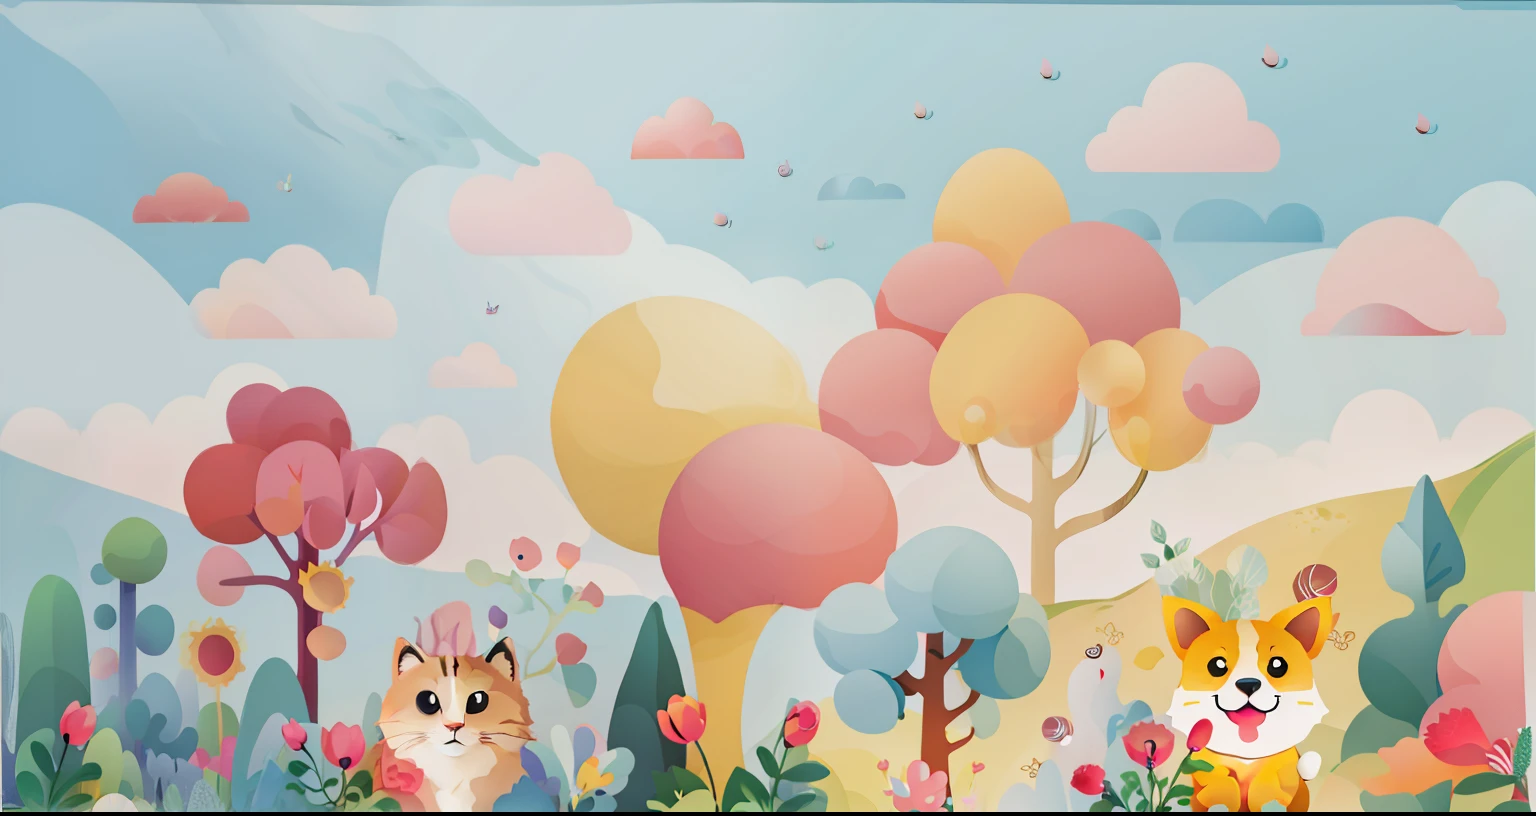 There are two cats standing on the grass, Candy Forest, soft forest background, Lovely numbers Art, Fairy tale style background, Lovely numbers, hand painted cartoon art style, whimsical forest, Magic forest background, sky forest background, 4k high definition illustration wallpaper, Highly detailed scenes, kingdom of light background, Lovely and detailed digital art, Lying in Baiyun Wonderland